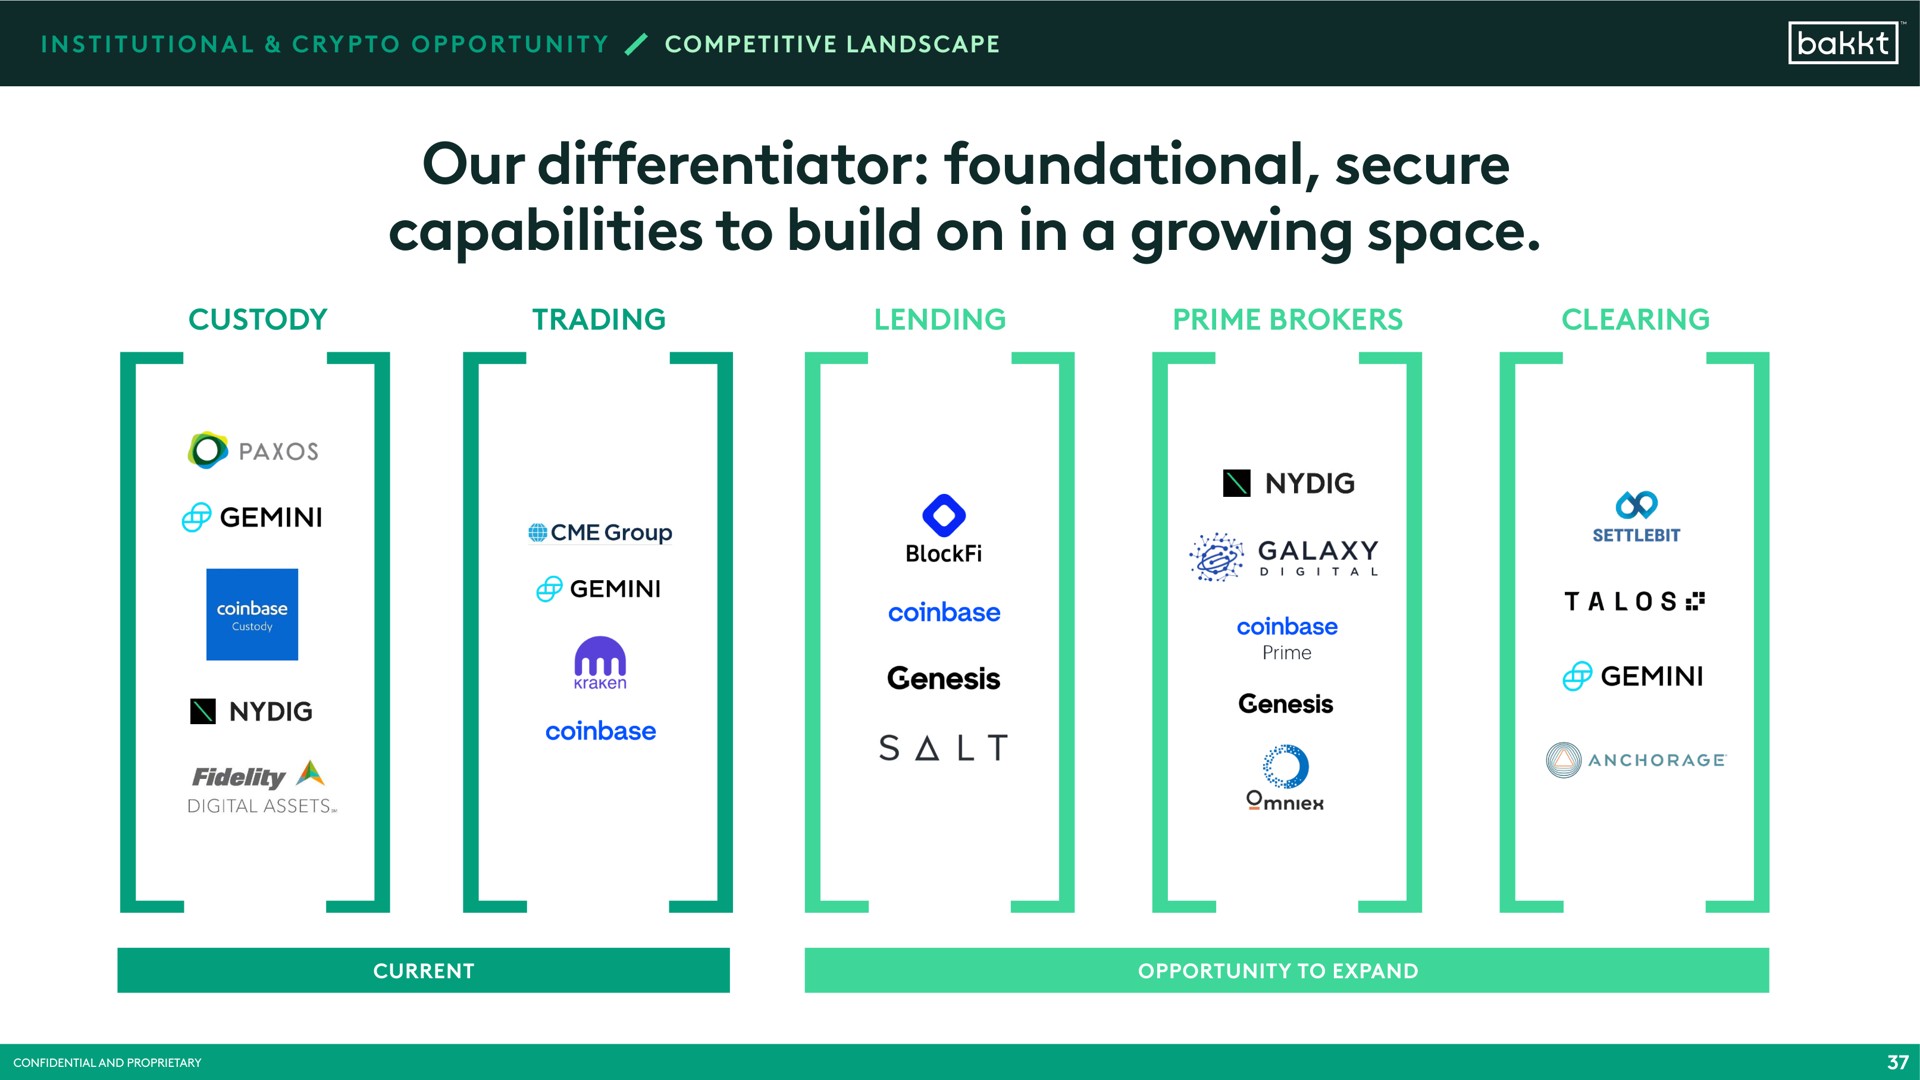 our differentiator foundational secure capabilities to build on in a growing space bloc be galaxy | Bakkt